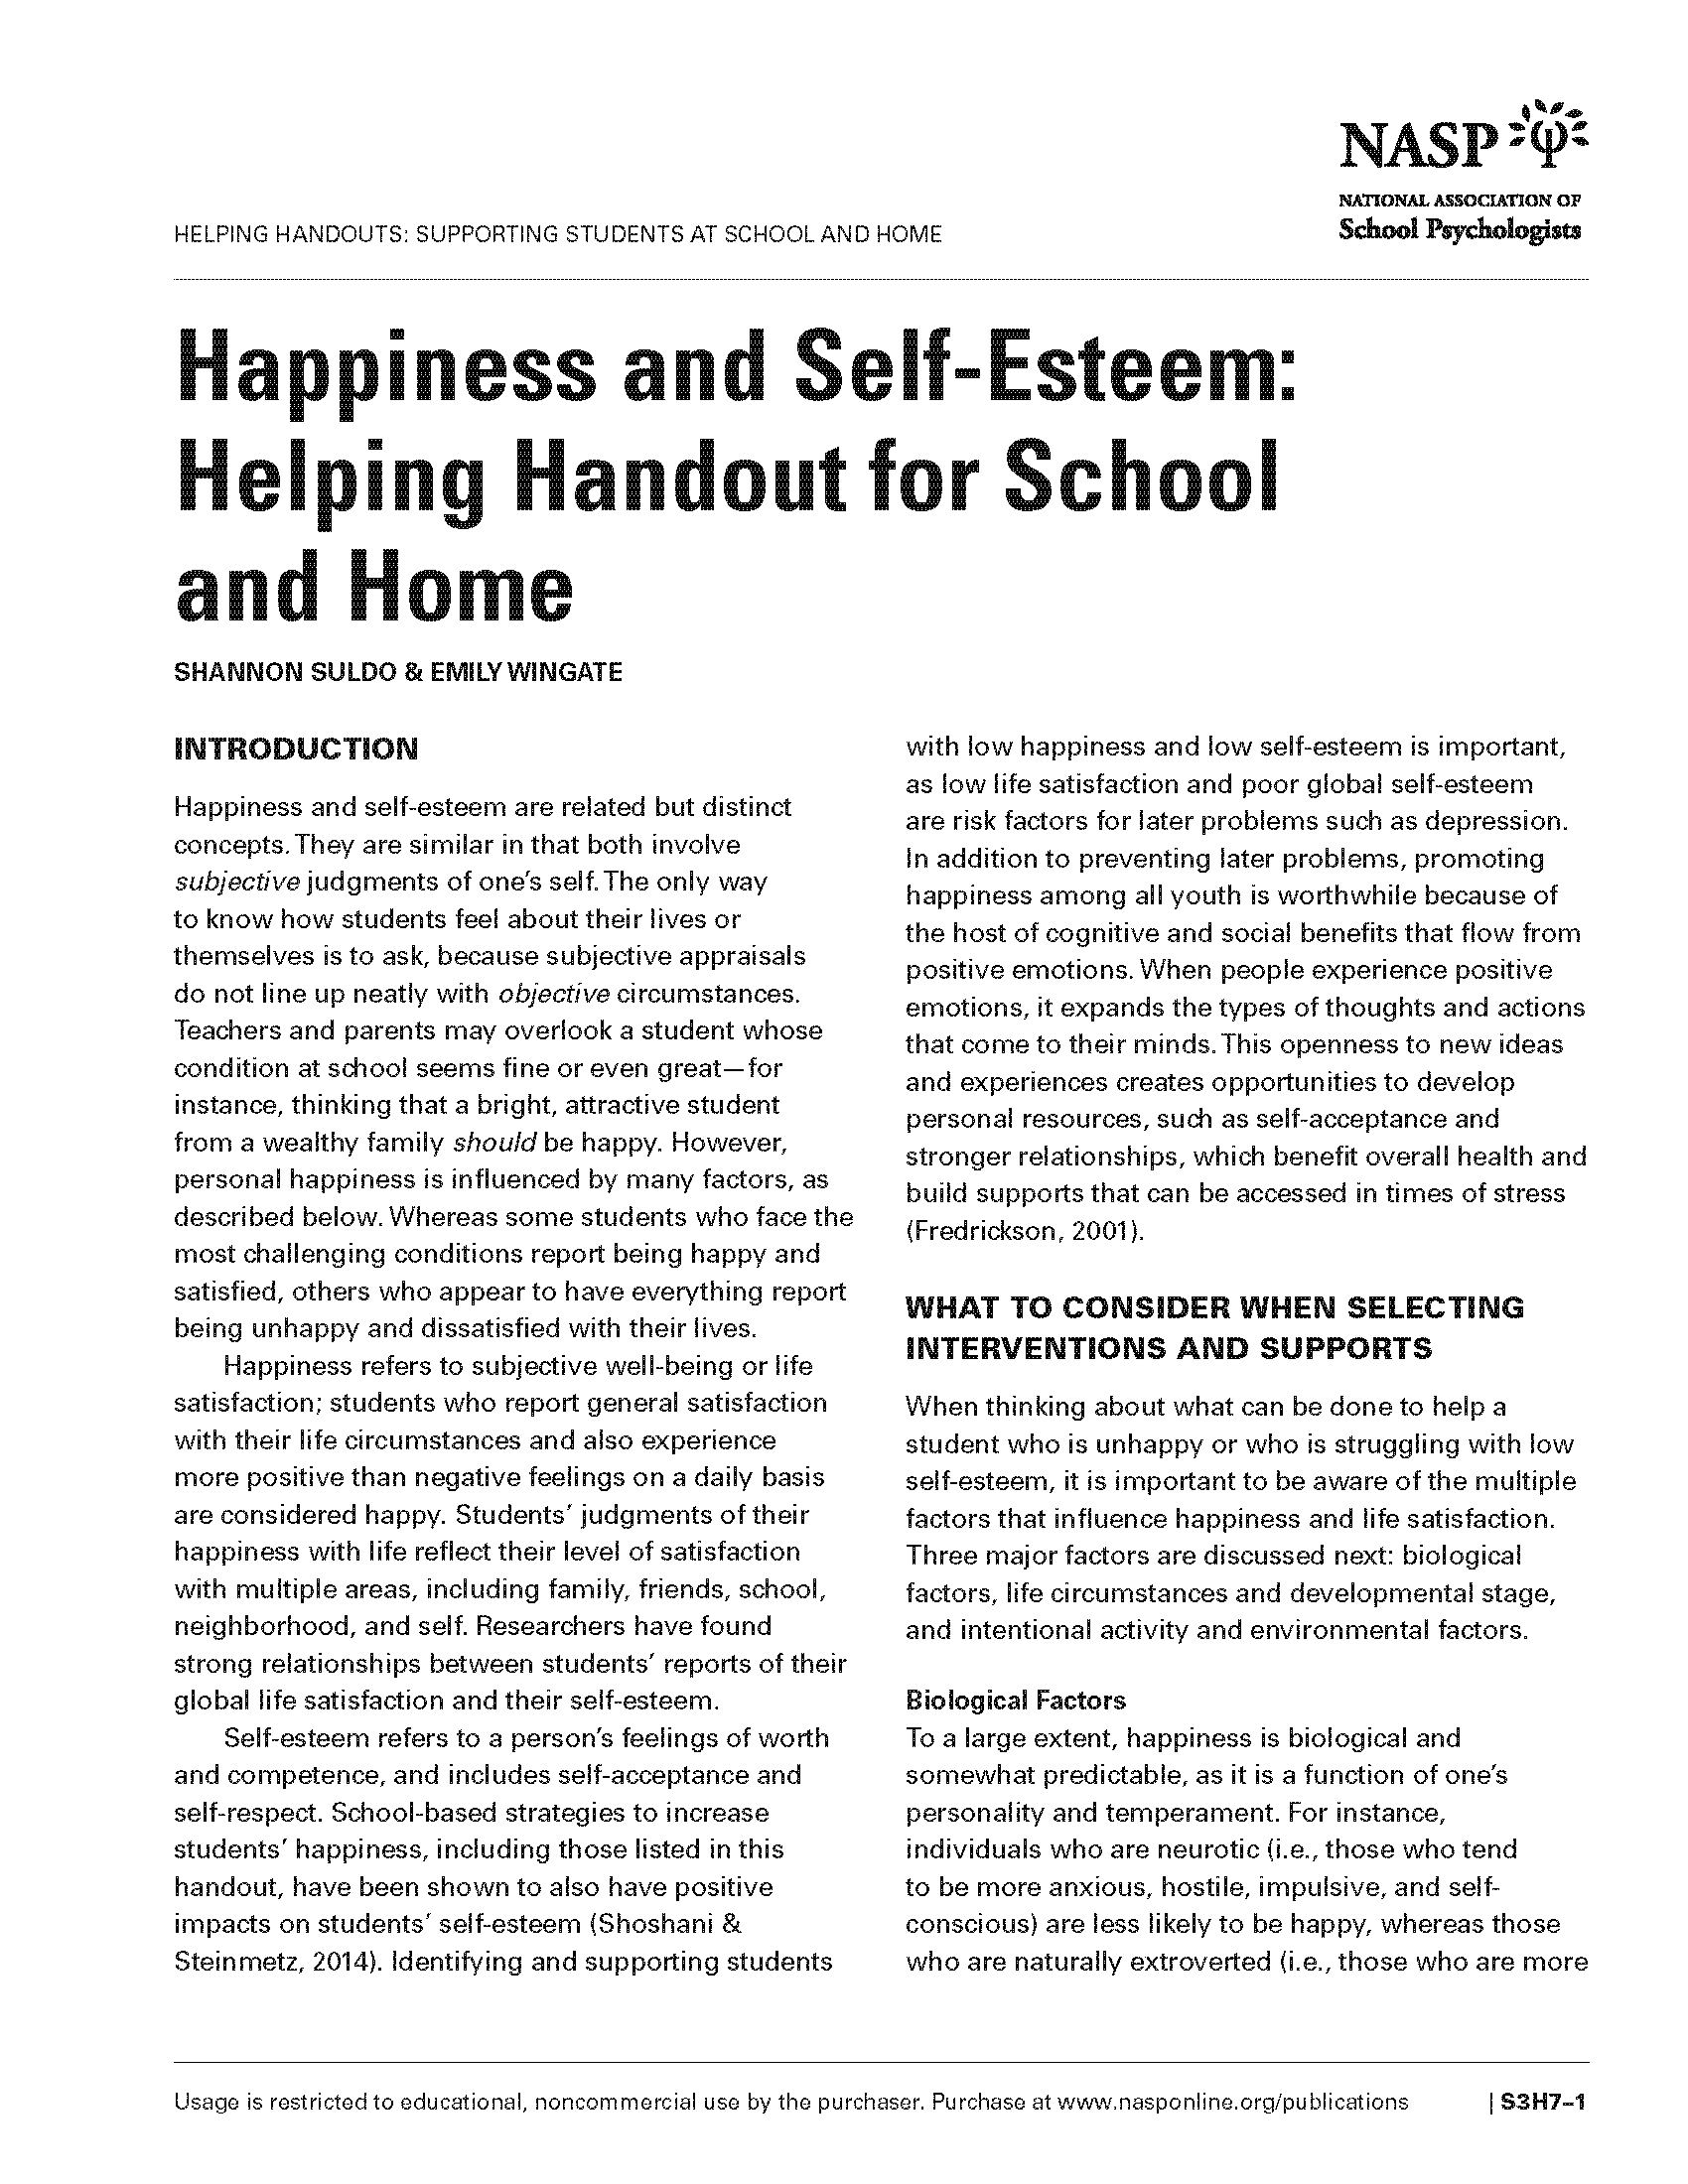 Happiness and Self-Esteem: Helping Handout for School and Home